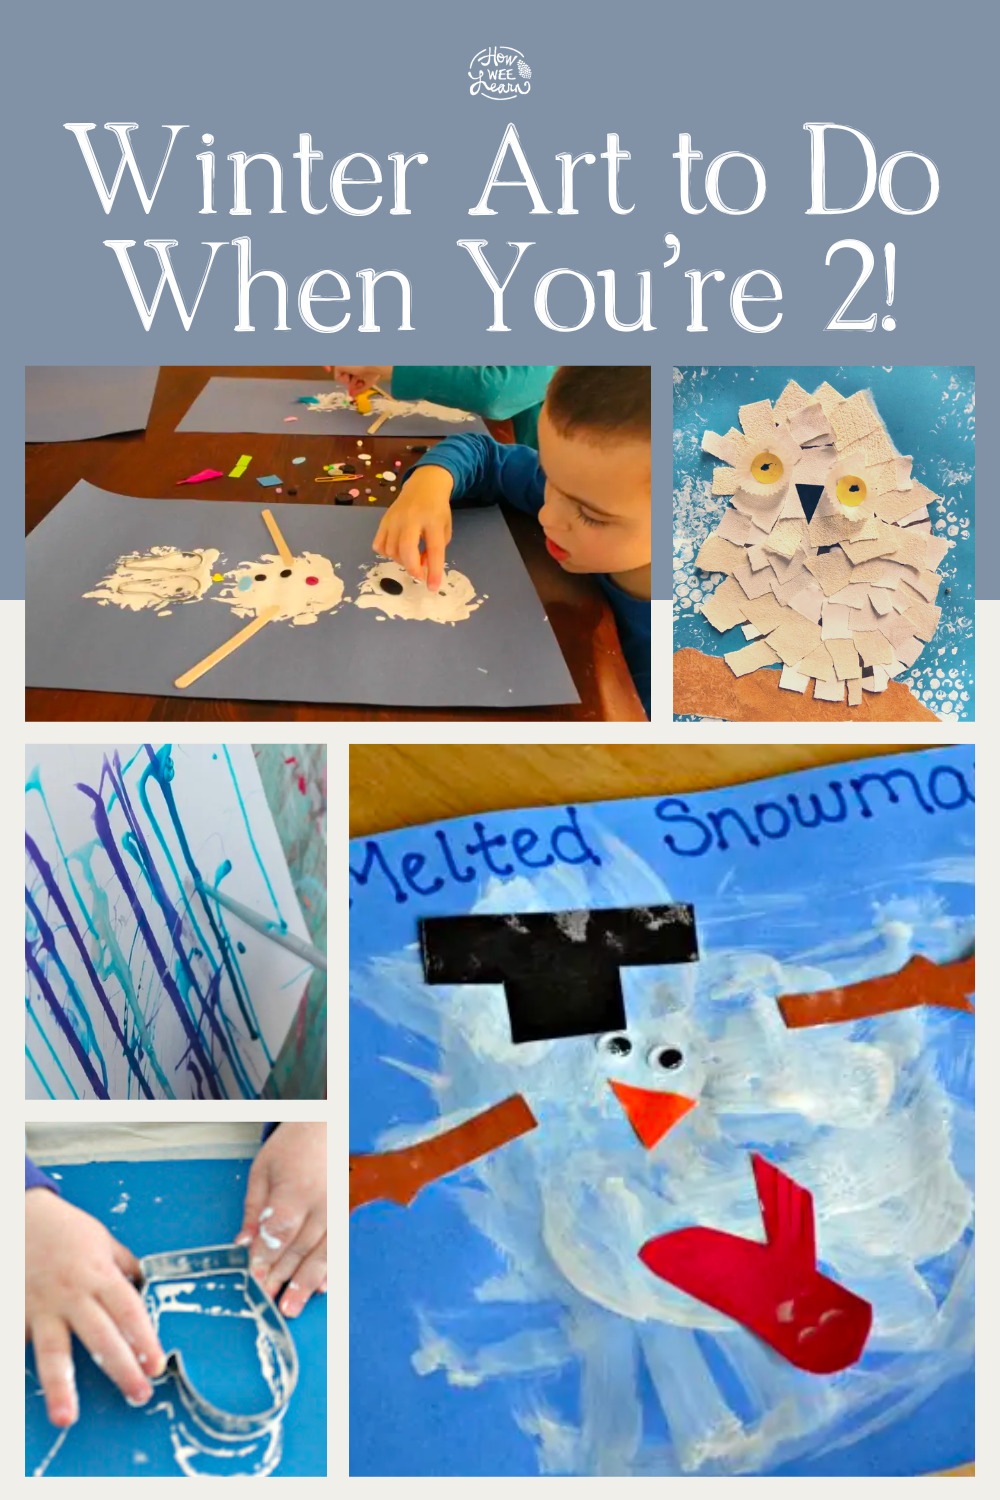 Winter Art to Do When You're 2